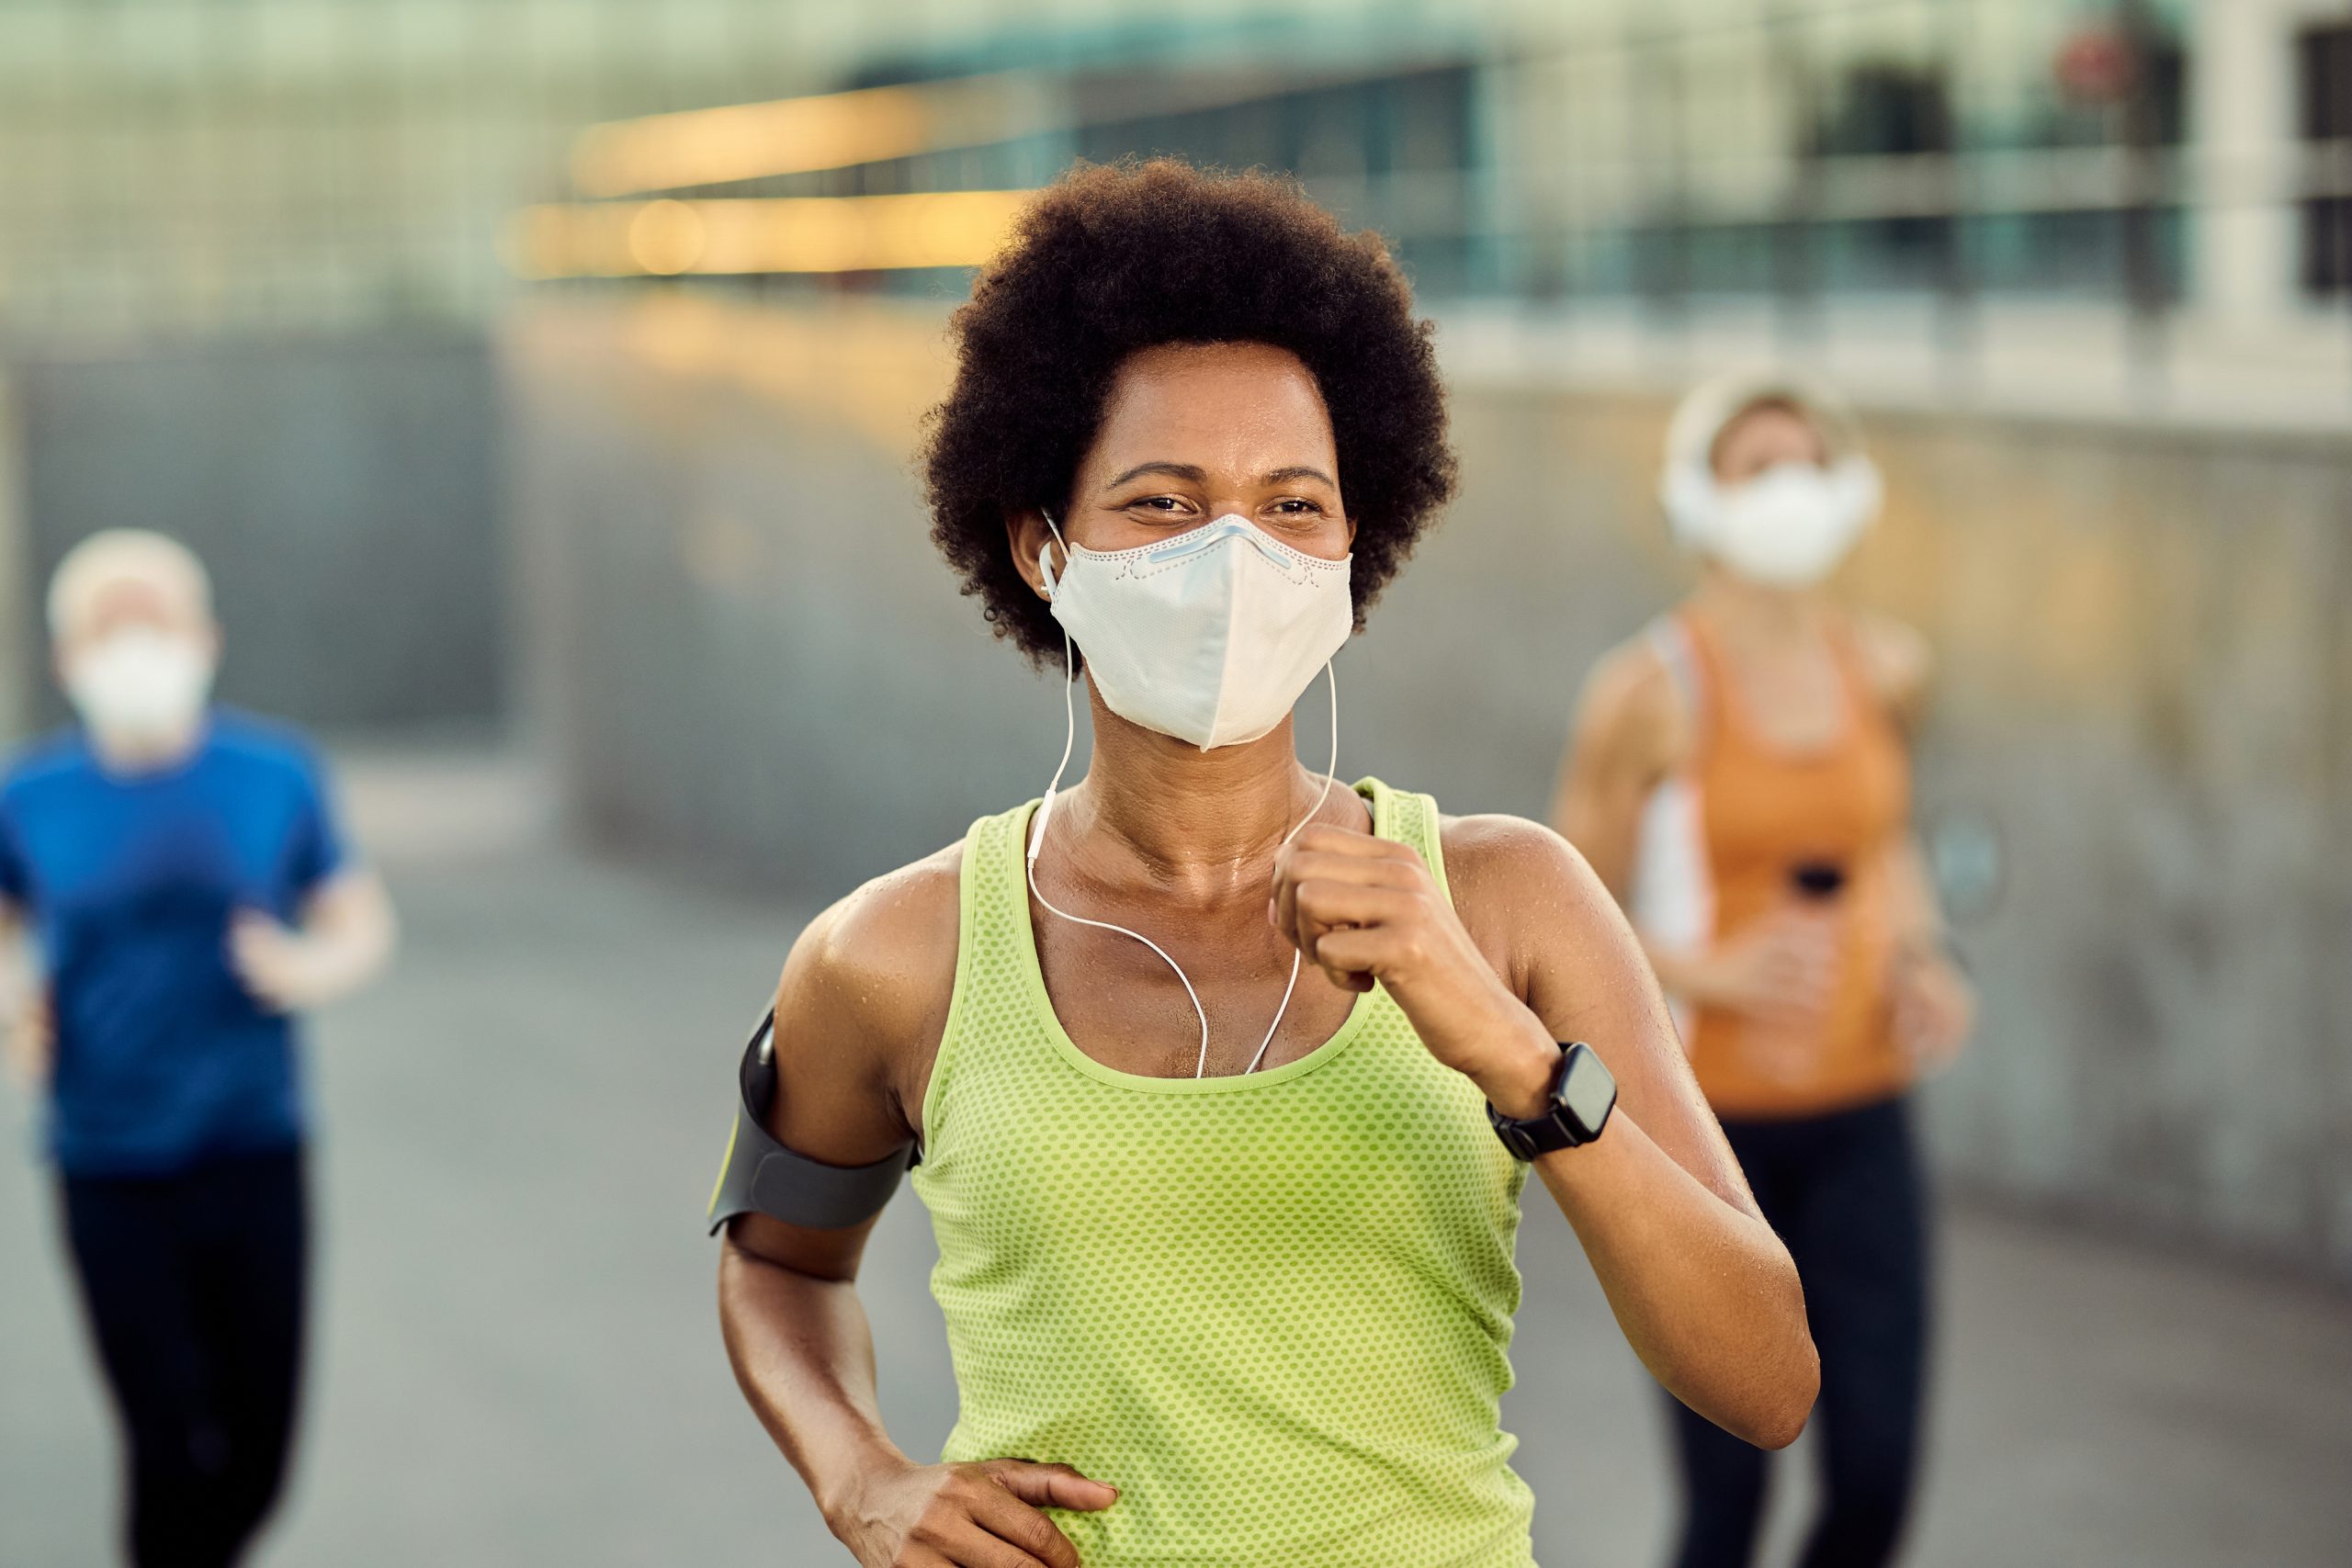 woman running with mask on